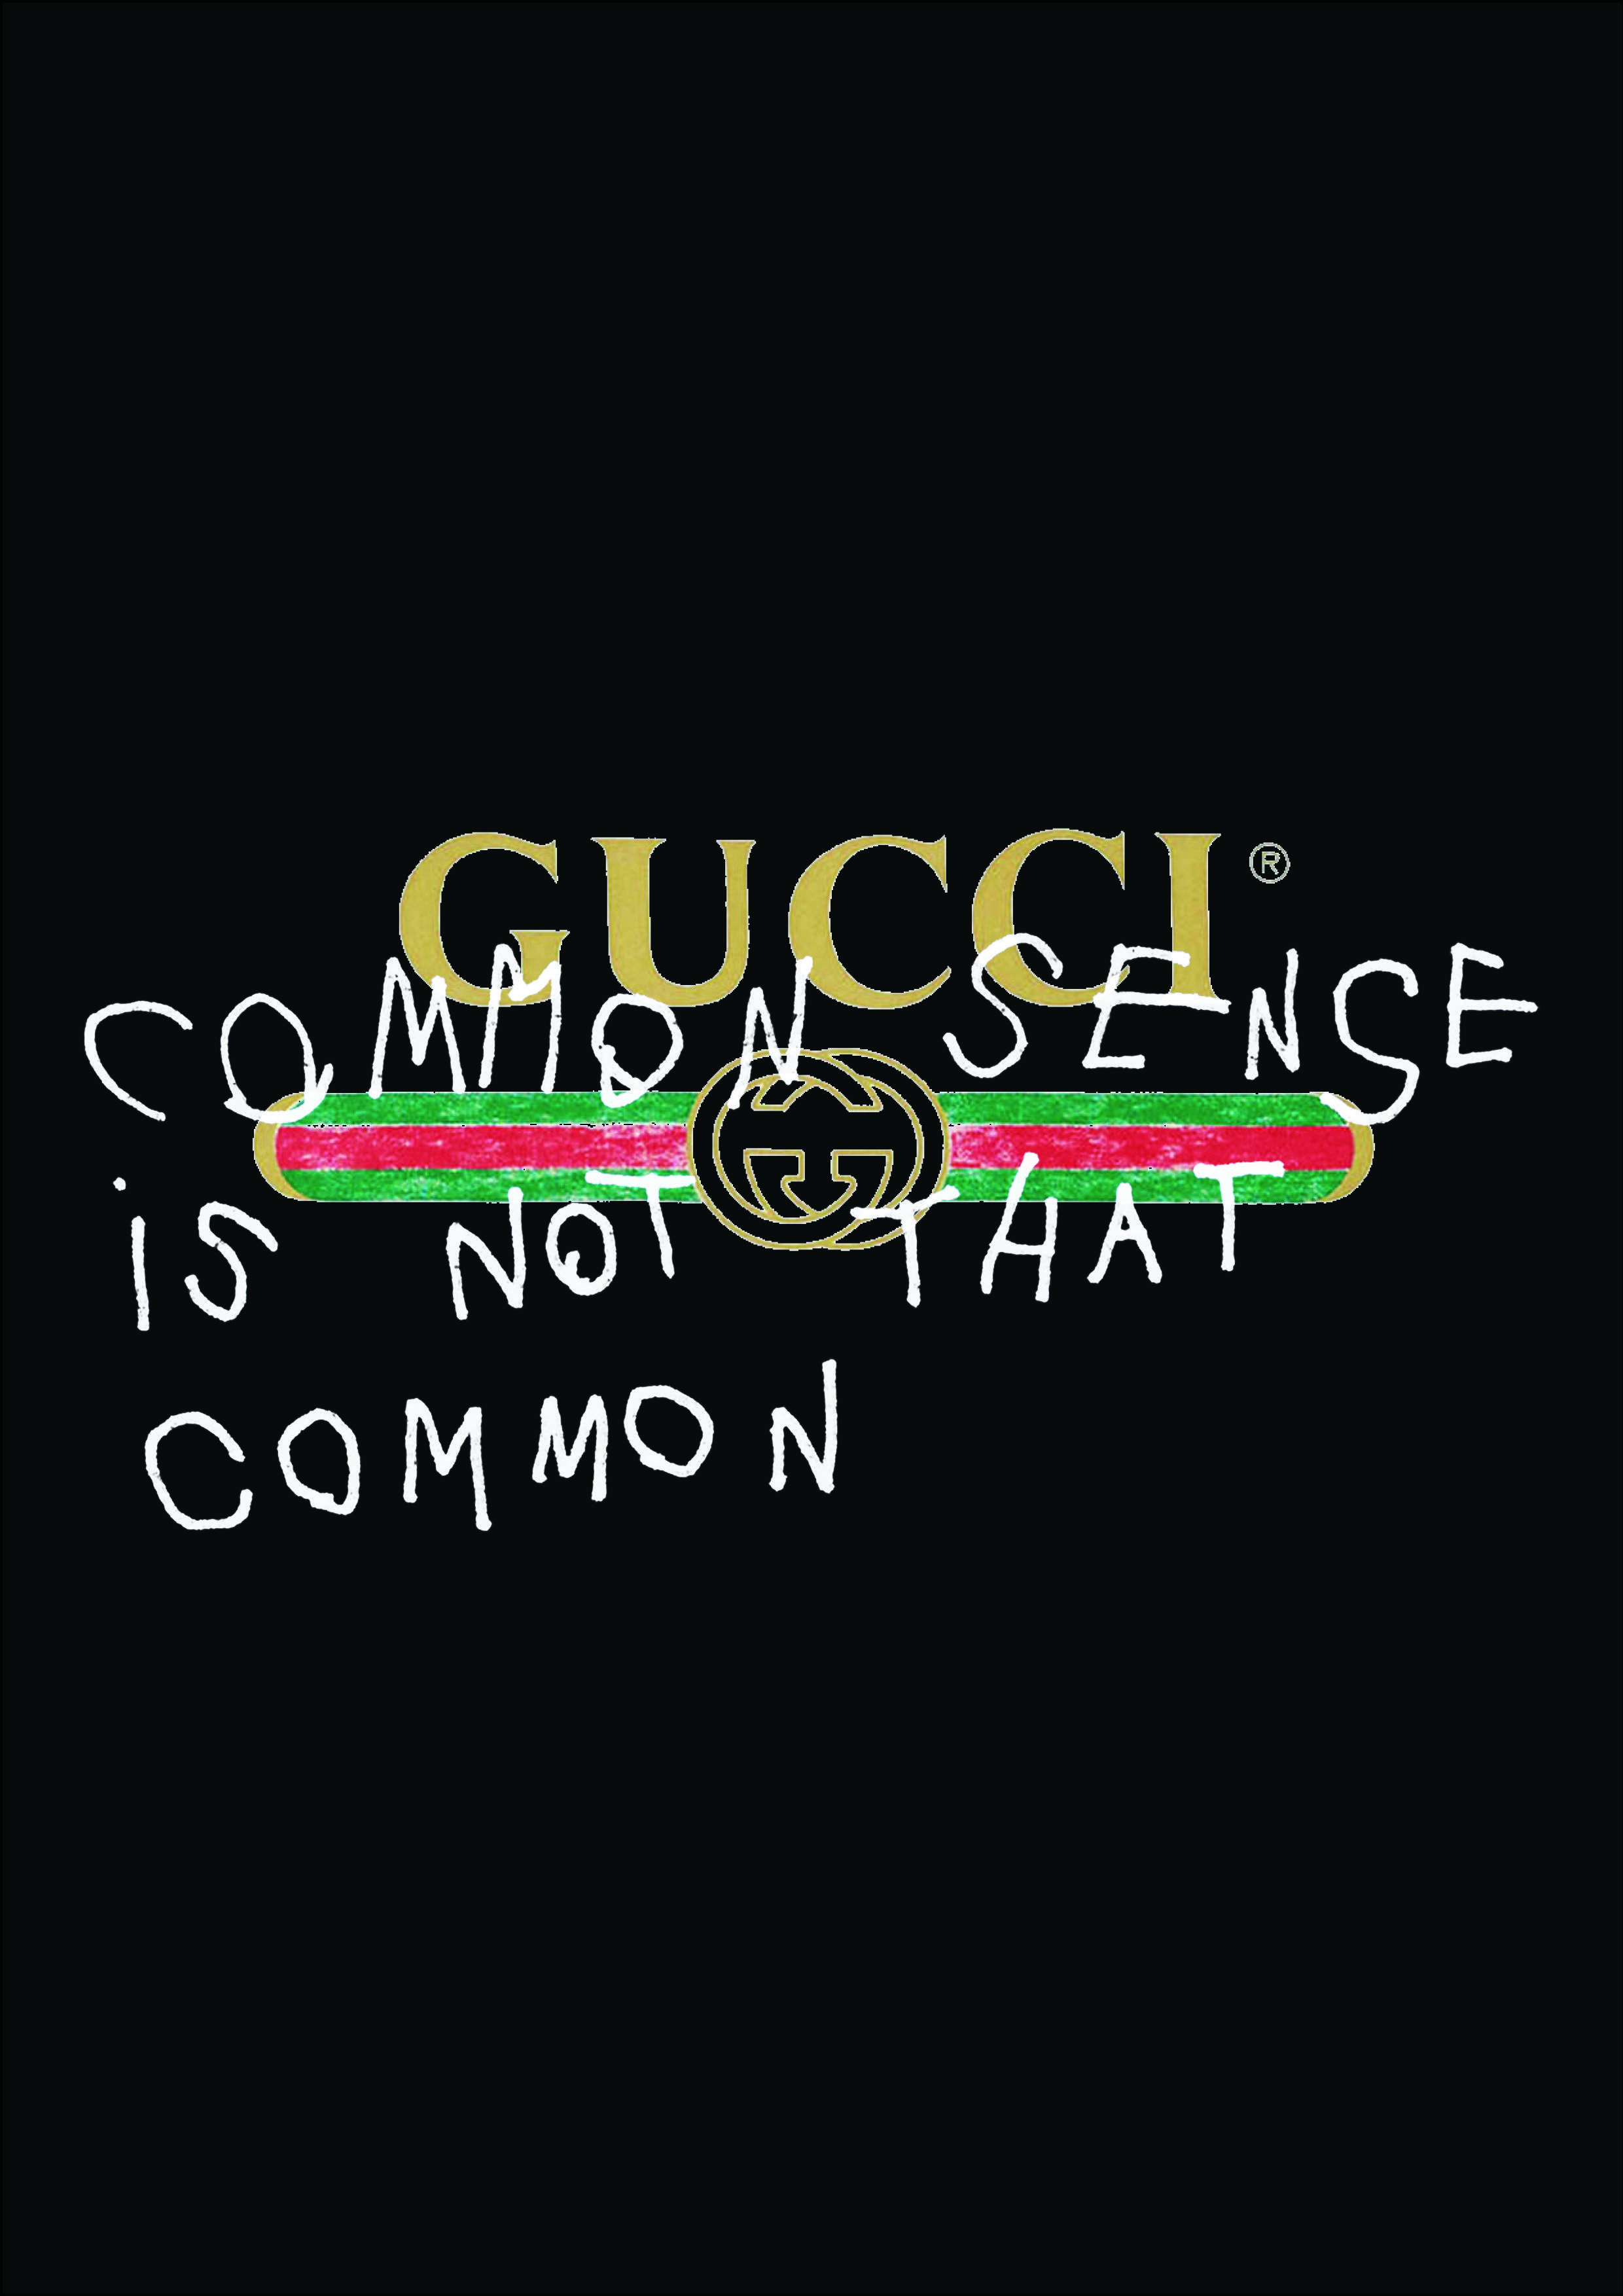 Download Gucci wallpaper by Trippie_future - a2 - Free on ZEDGE™ now.  Browse millions of…